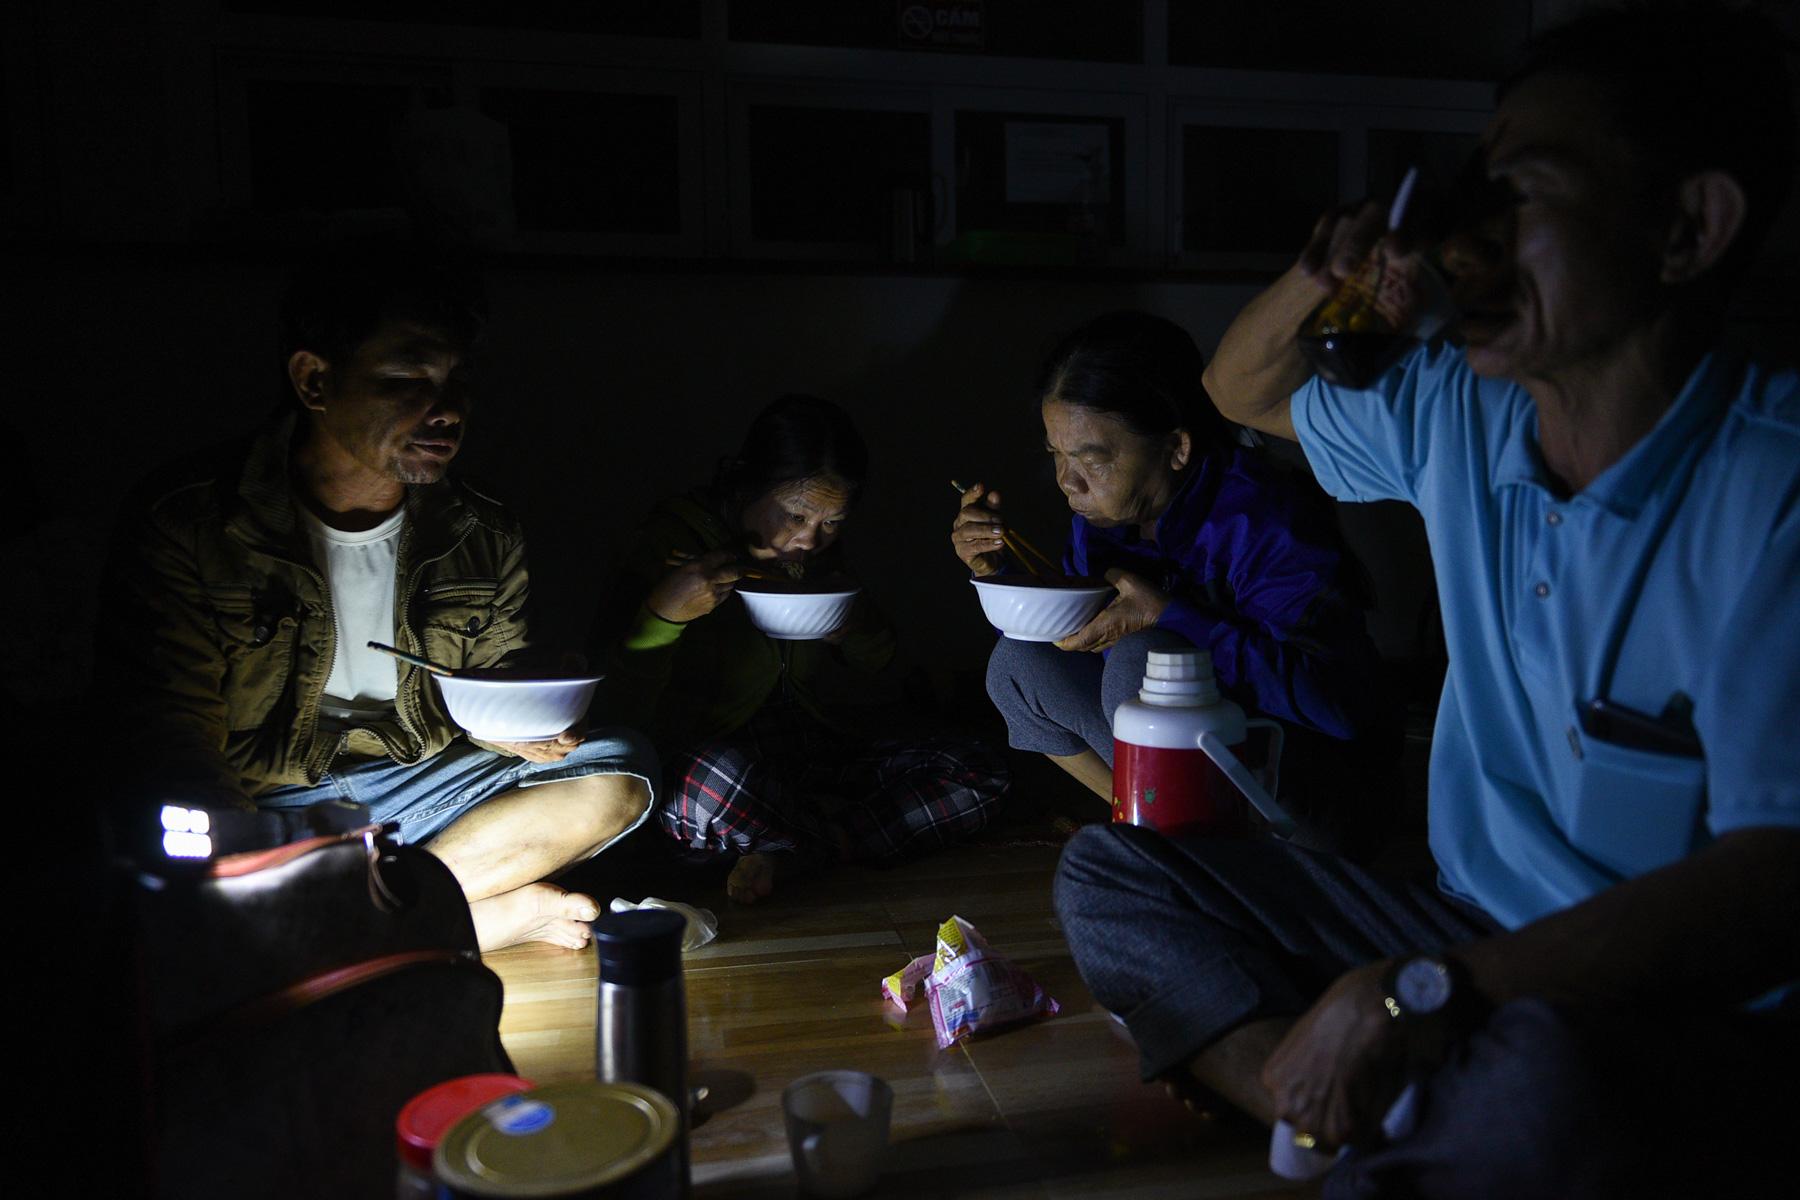 A month with full of sorrow - Family eats in a shelter as Typhoon Molave lashes...